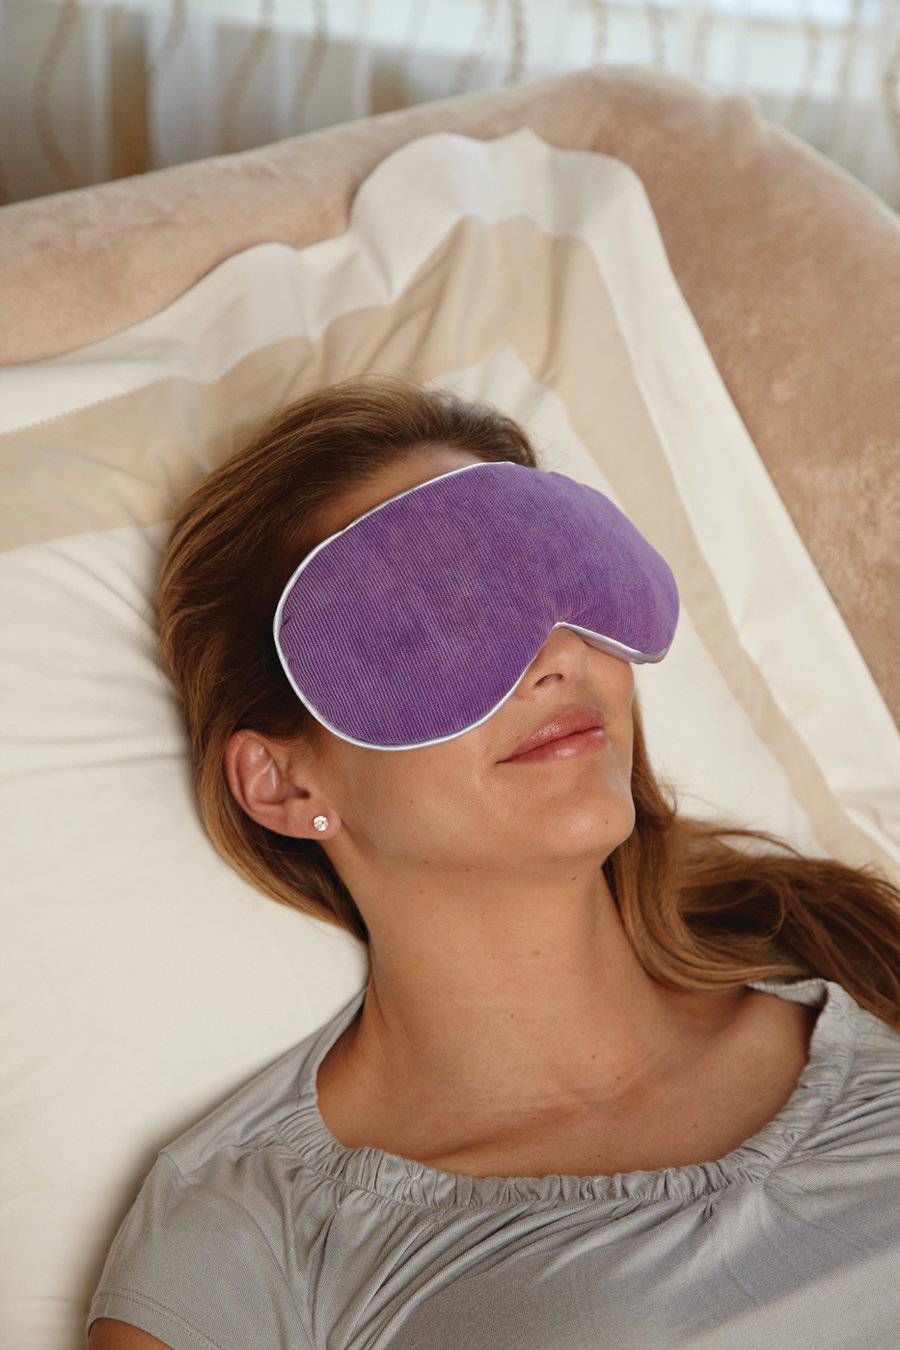 Bed Buddy Relaxation Mask - Carex Health Brands